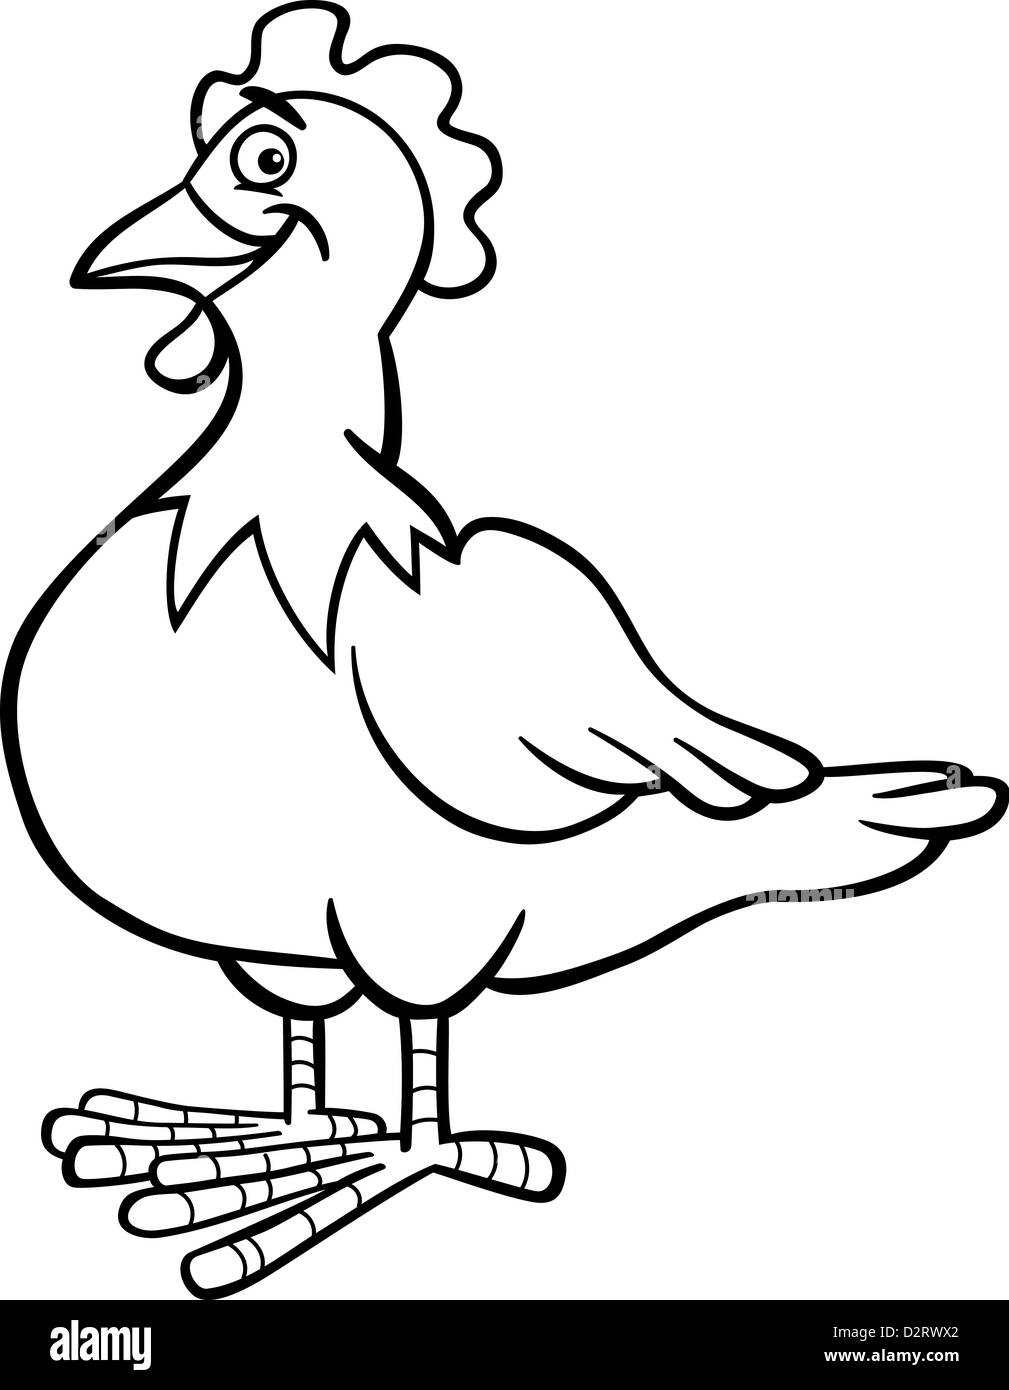 Black and White Cartoon Illustration of Funny Hen or Chicken Farm Bird  Animal for Coloring Book Stock Photo - Alamy